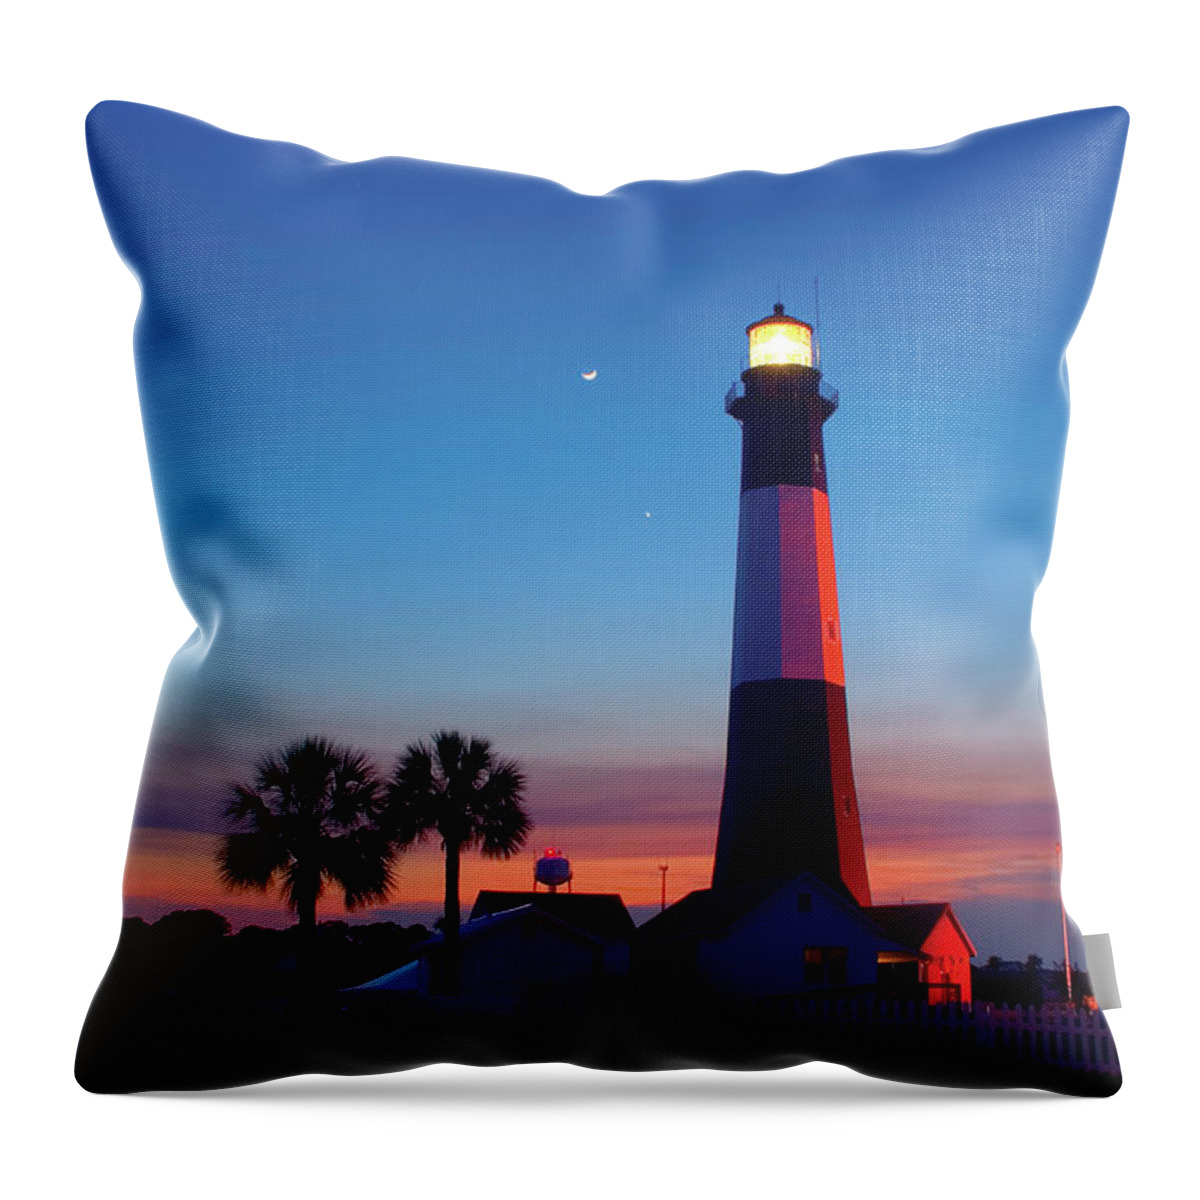 Tranquility Throw Pillow featuring the photograph Tybee Island Lighthouse At Dusk by Jung-pang Wu